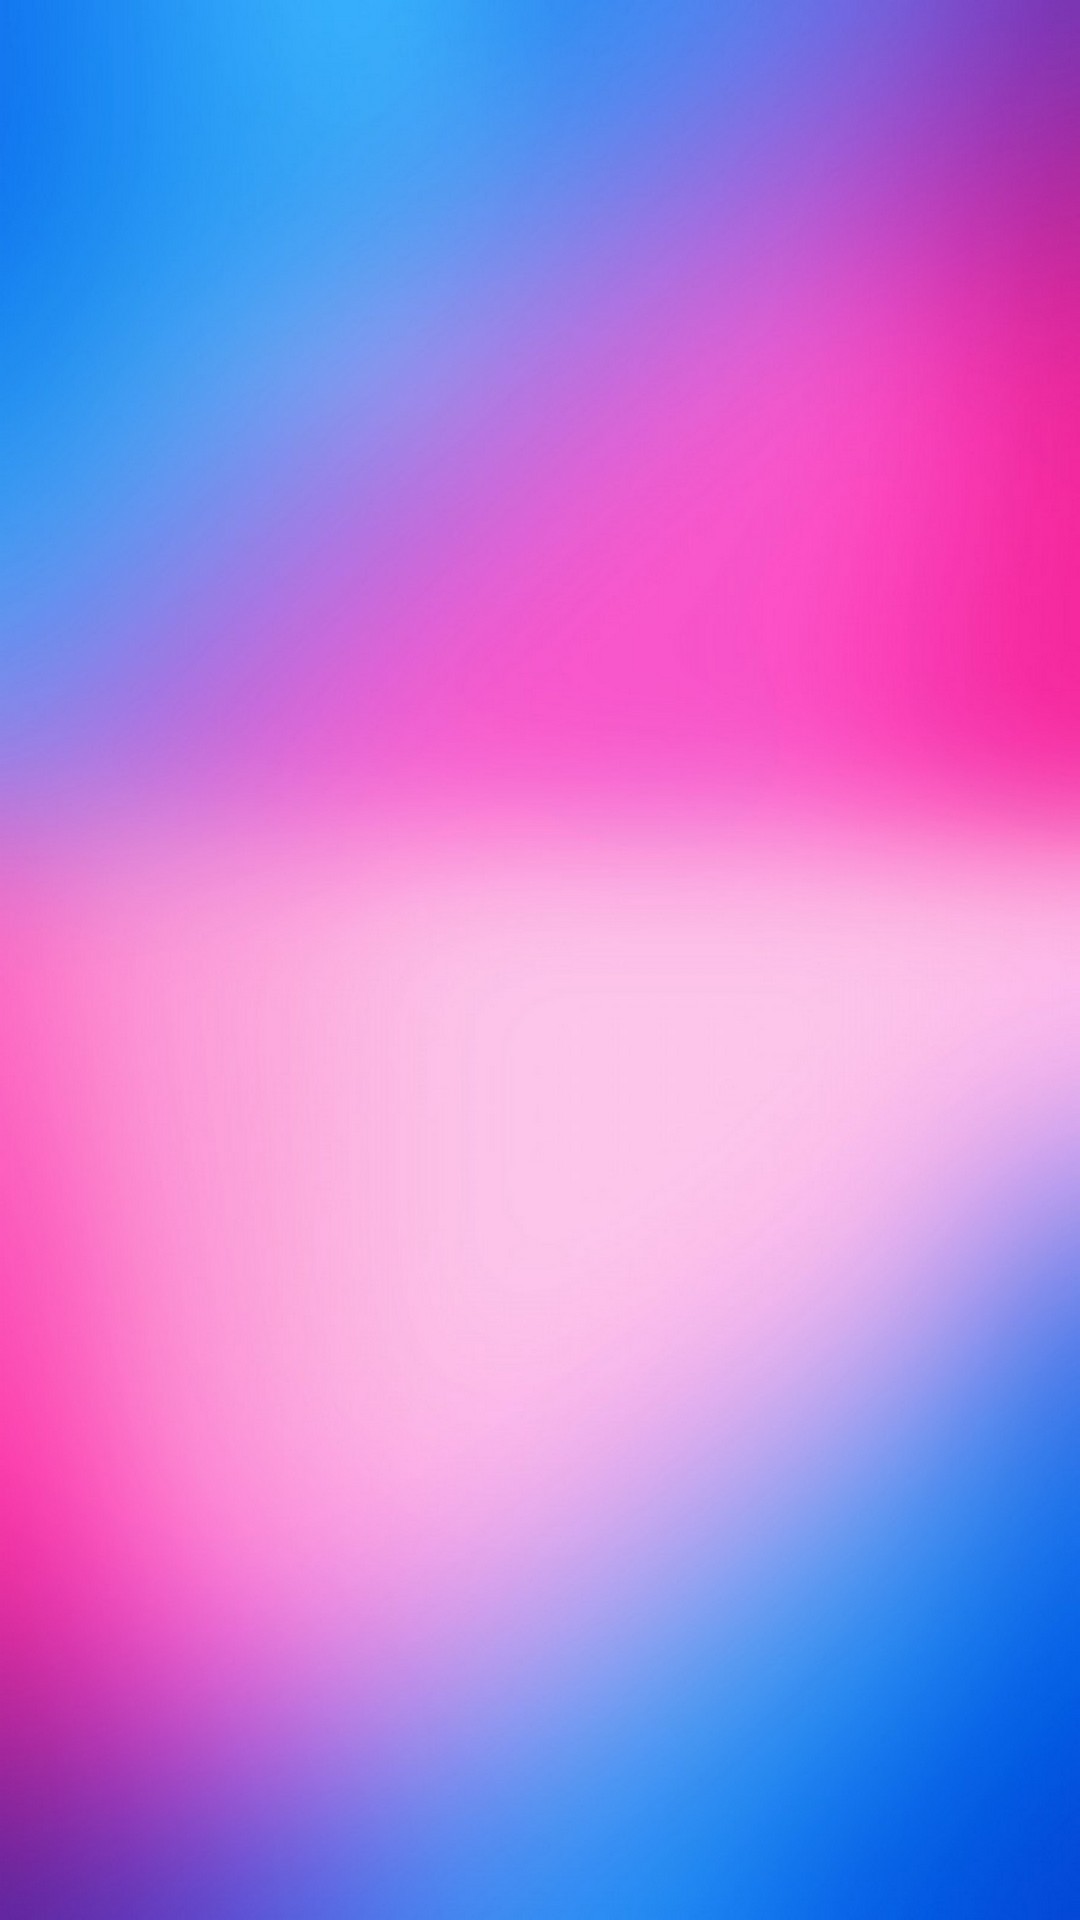 Wallpaper Gradient Android With high-resolution 1080X1920 pixel. You can use this wallpaper for your Android backgrounds, Tablet, Samsung Screensavers, Mobile Phone Lock Screen and another Smartphones device